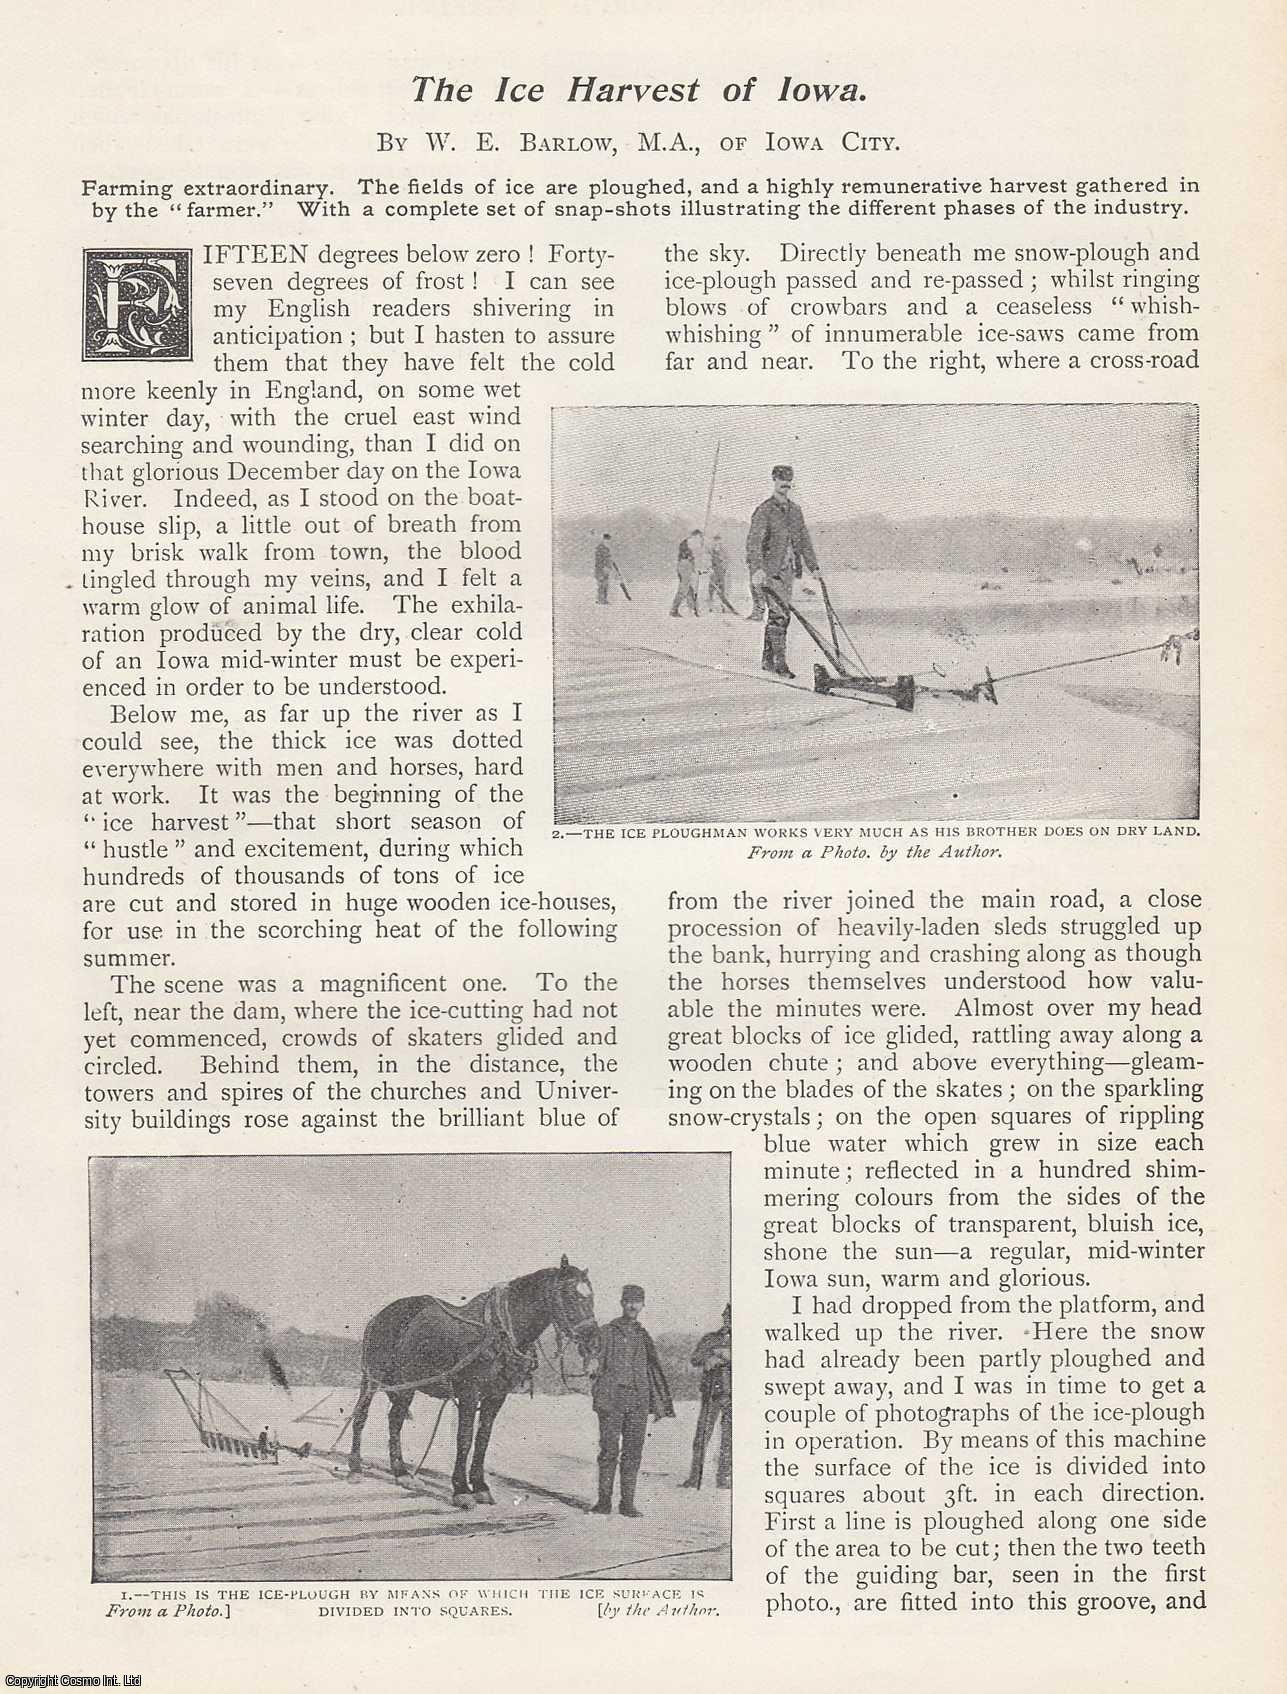 W.E. Barlow - The Ice Harvest of Iowa. An uncommon original article from the Wide World Magazine, 1899.